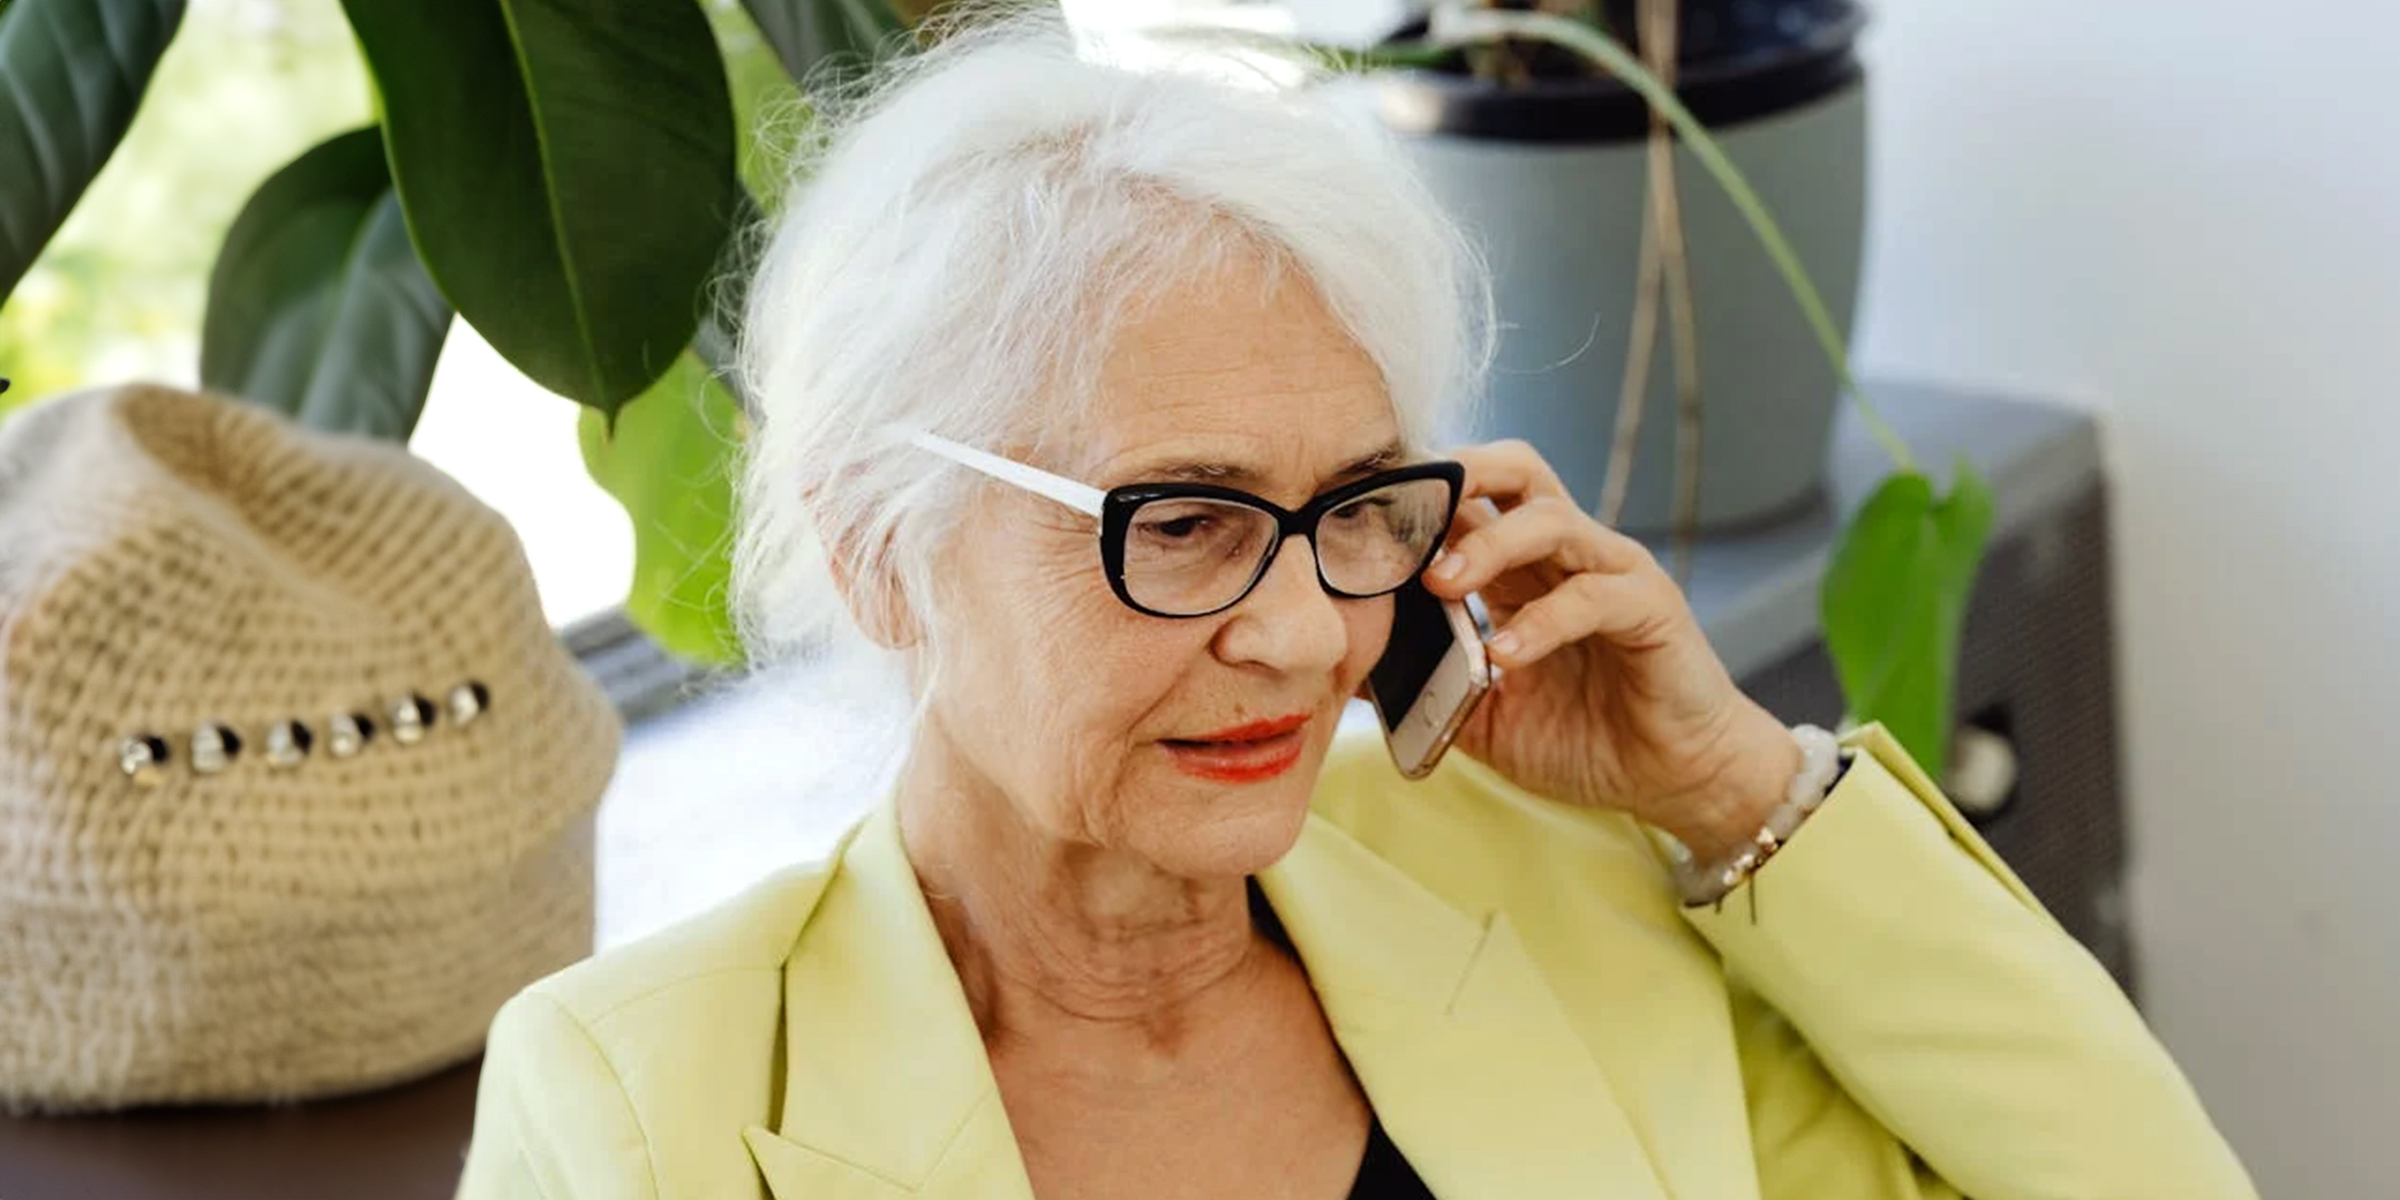 An elderly woman answering a cell phone call | Source: Pexels